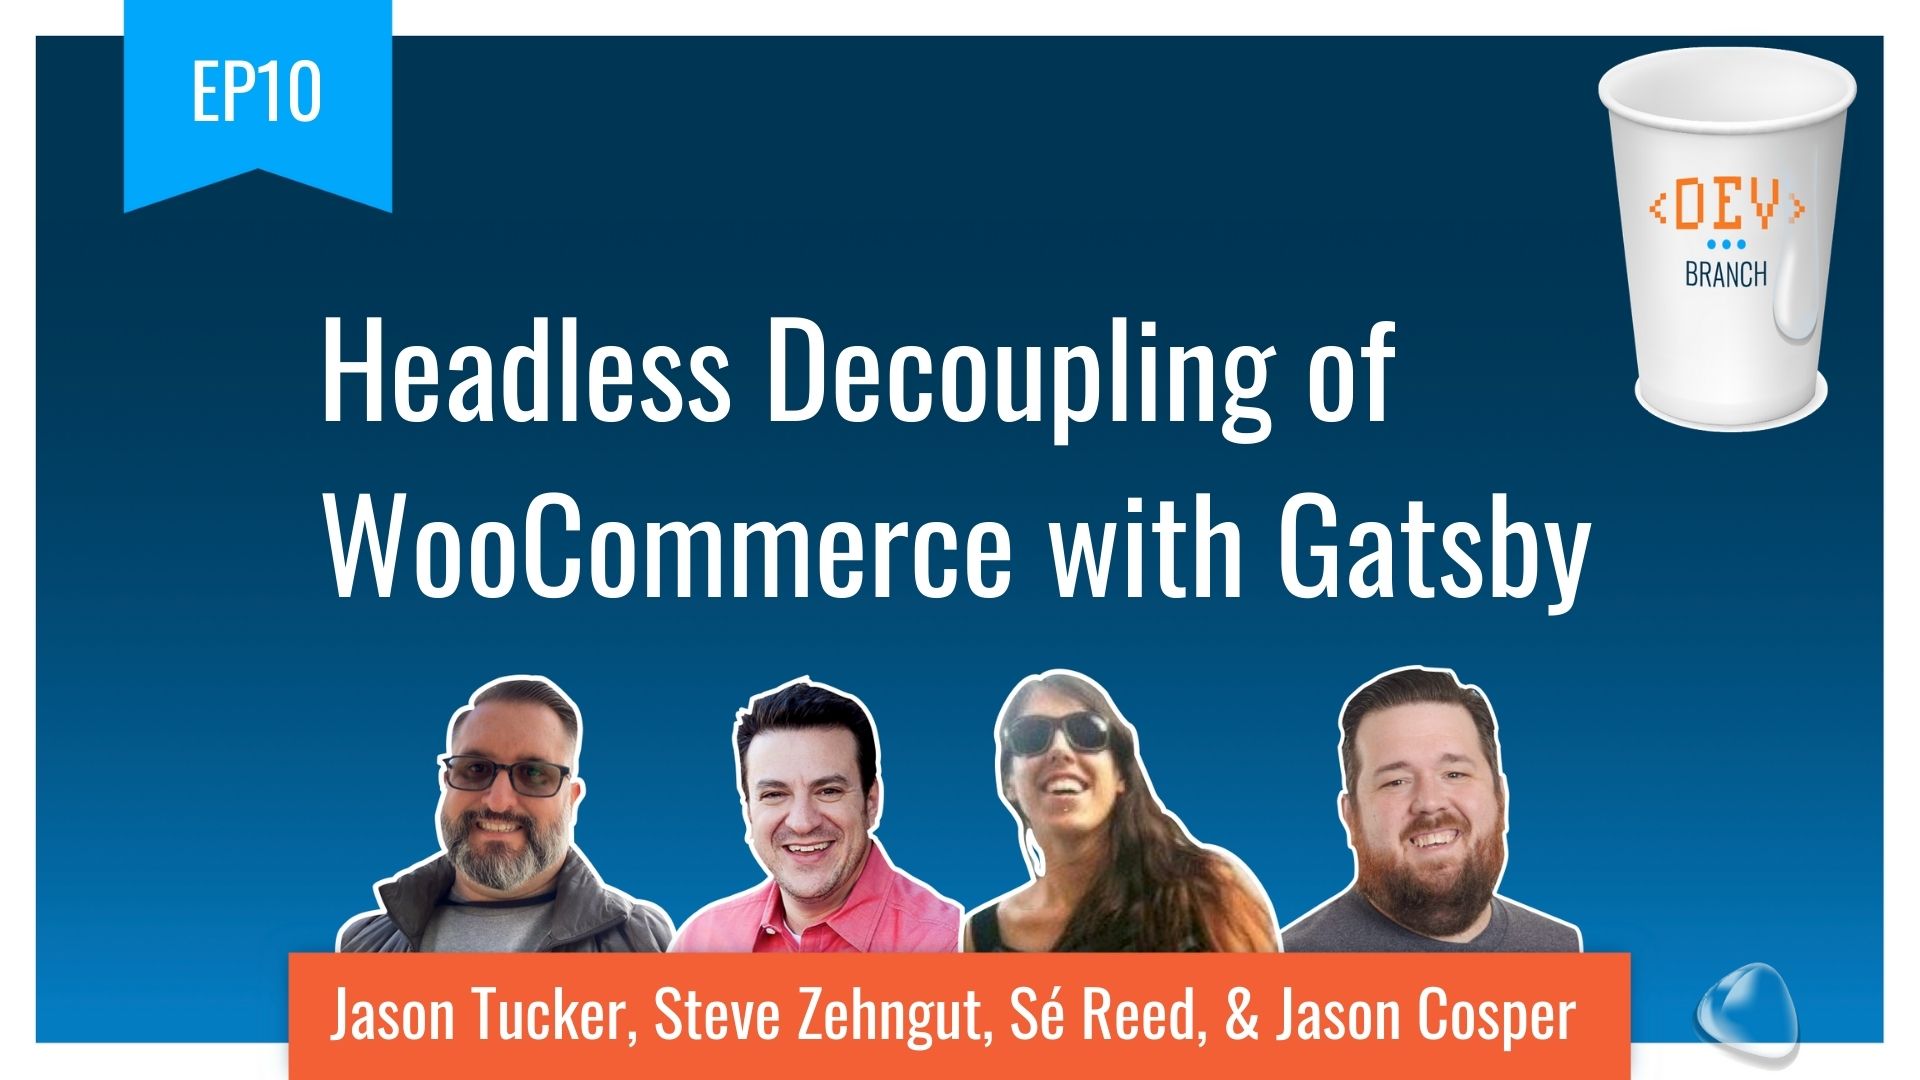 EP10 – Headless Decoupling of WooCommerce with Gatsby